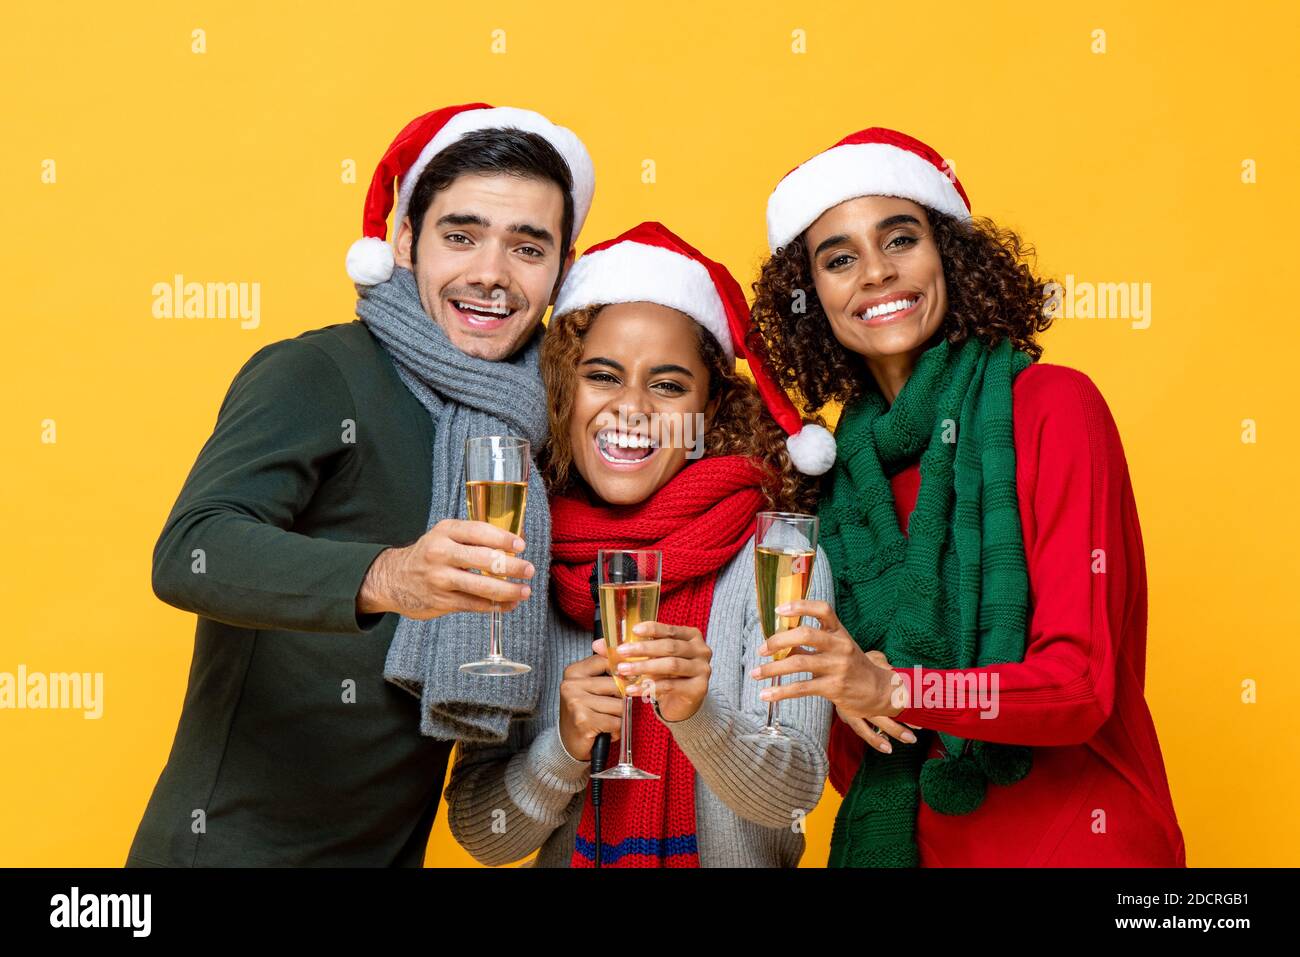 Happy portrait of three diverse friends in Christmas attire clinking glasses of champagne celebrating in studio yellow isolated background Stock Photo